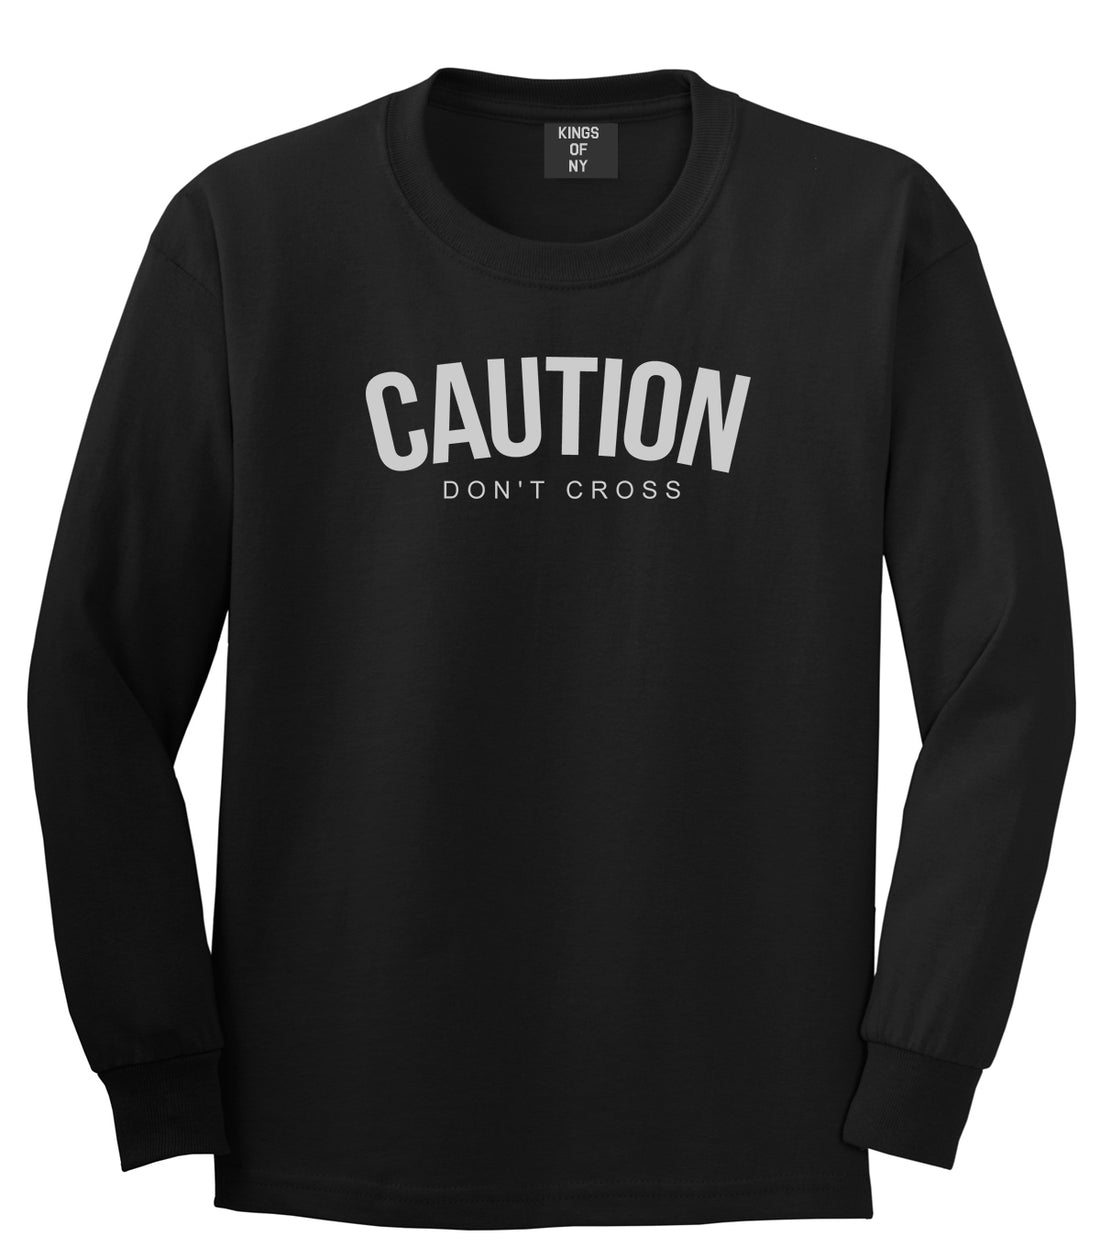 Caution Dont Cross Mens Long Sleeve T-Shirt Black by Kings Of NY